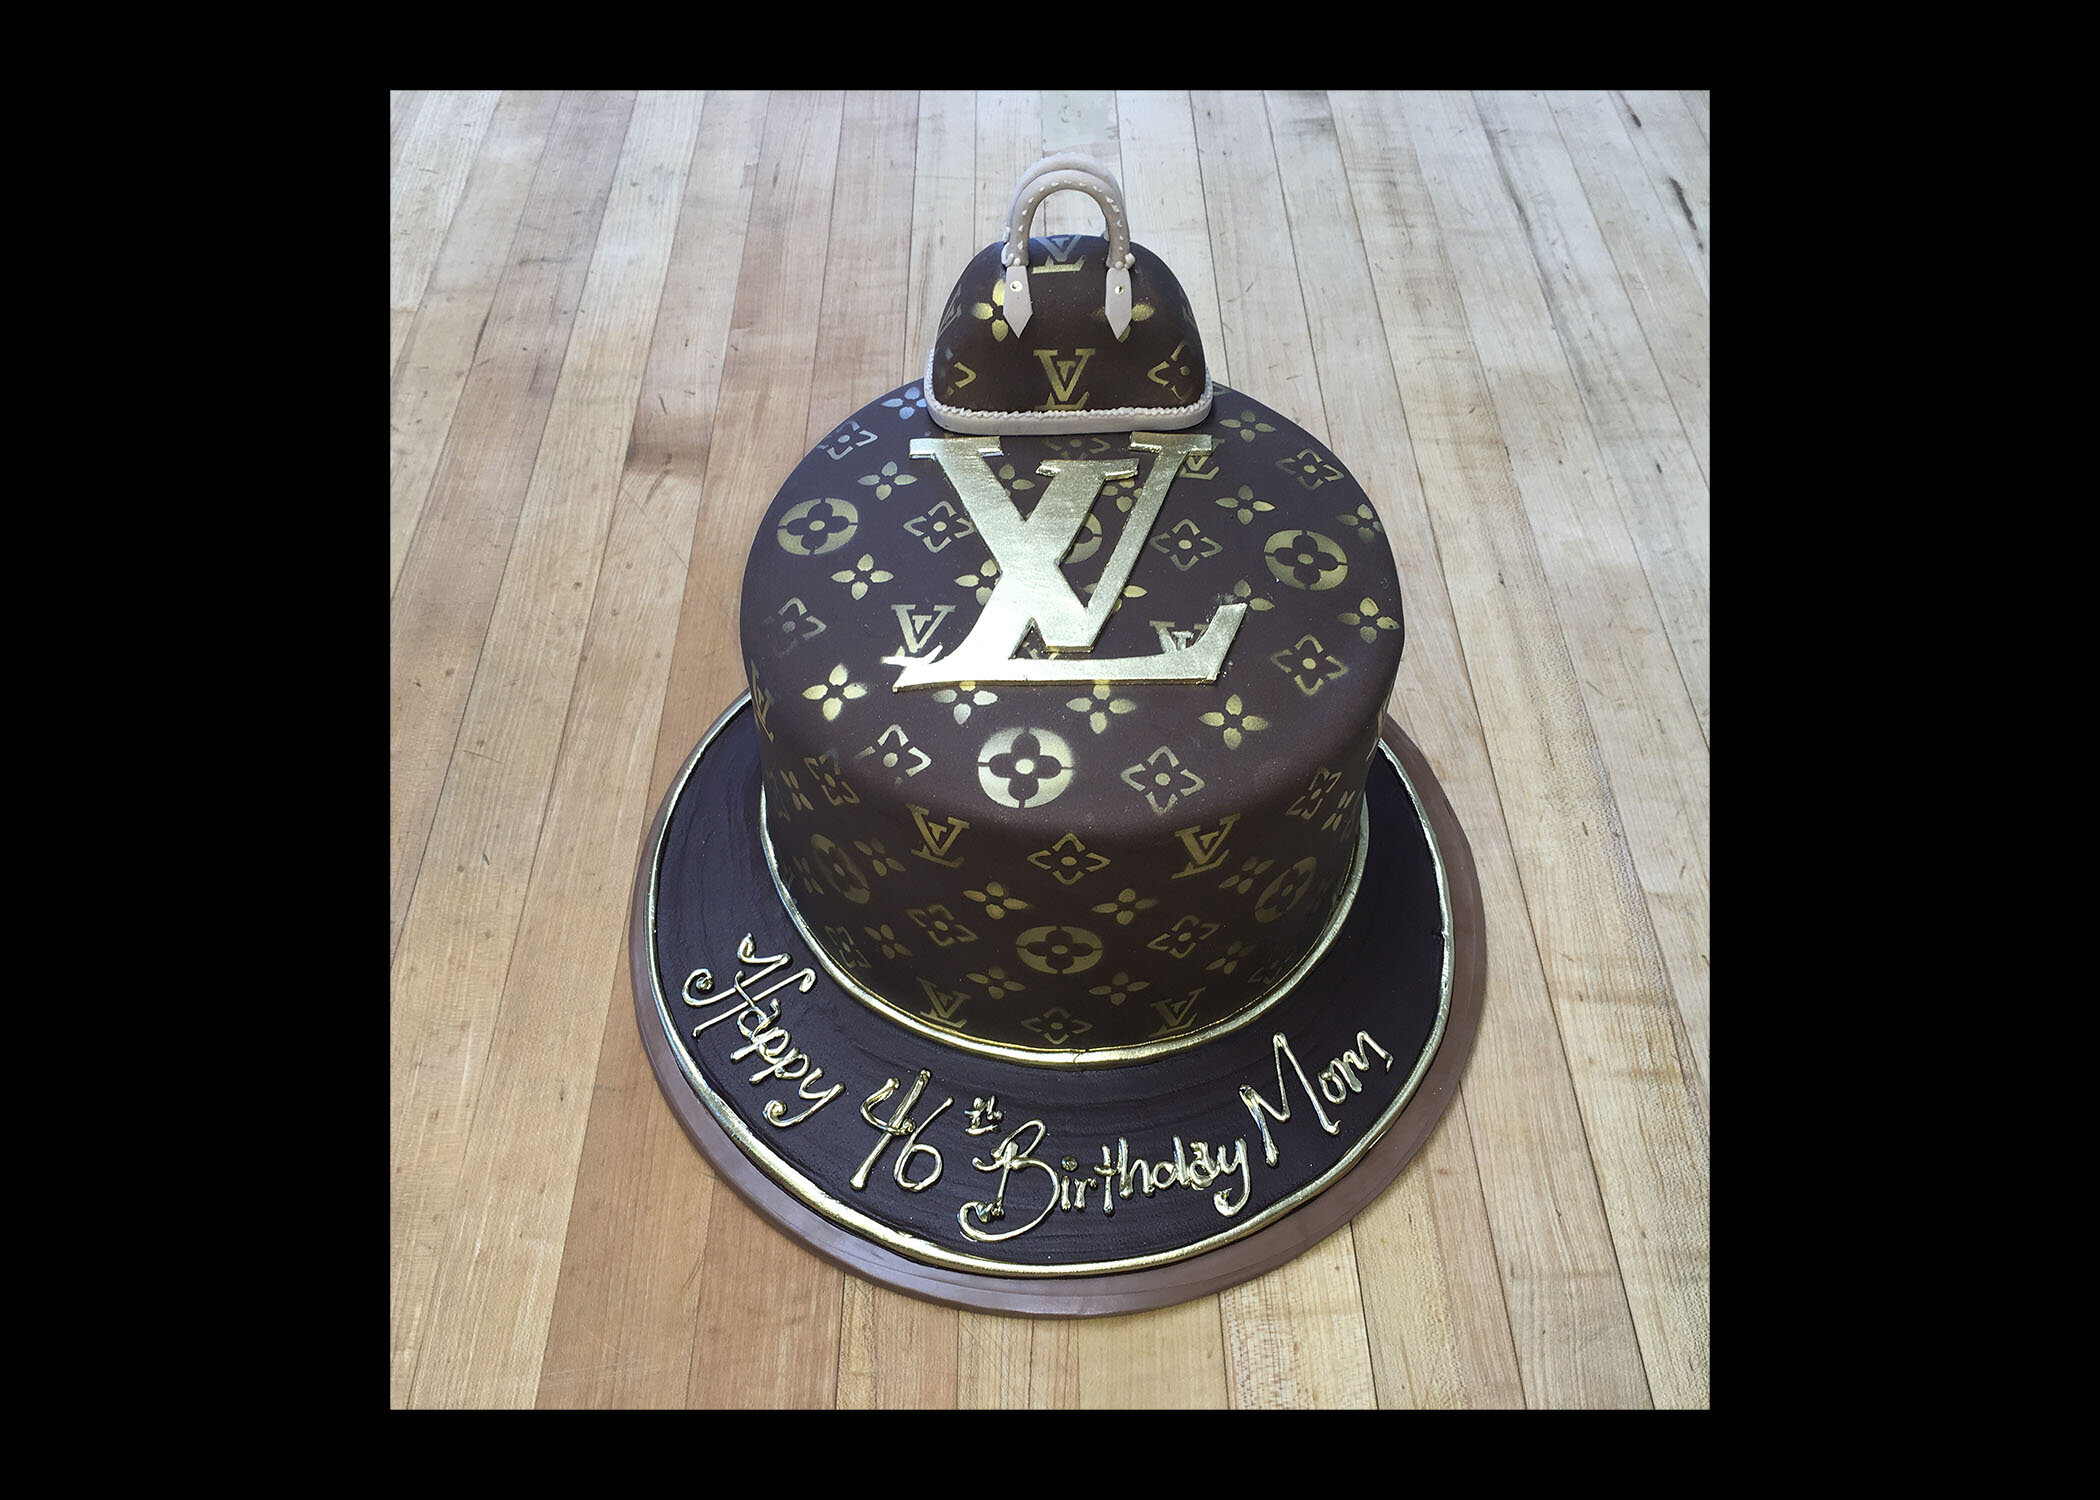 louis vuitton cake  Louis vuitton cake, Cake decorating with fondant, Cool birthday  cakes